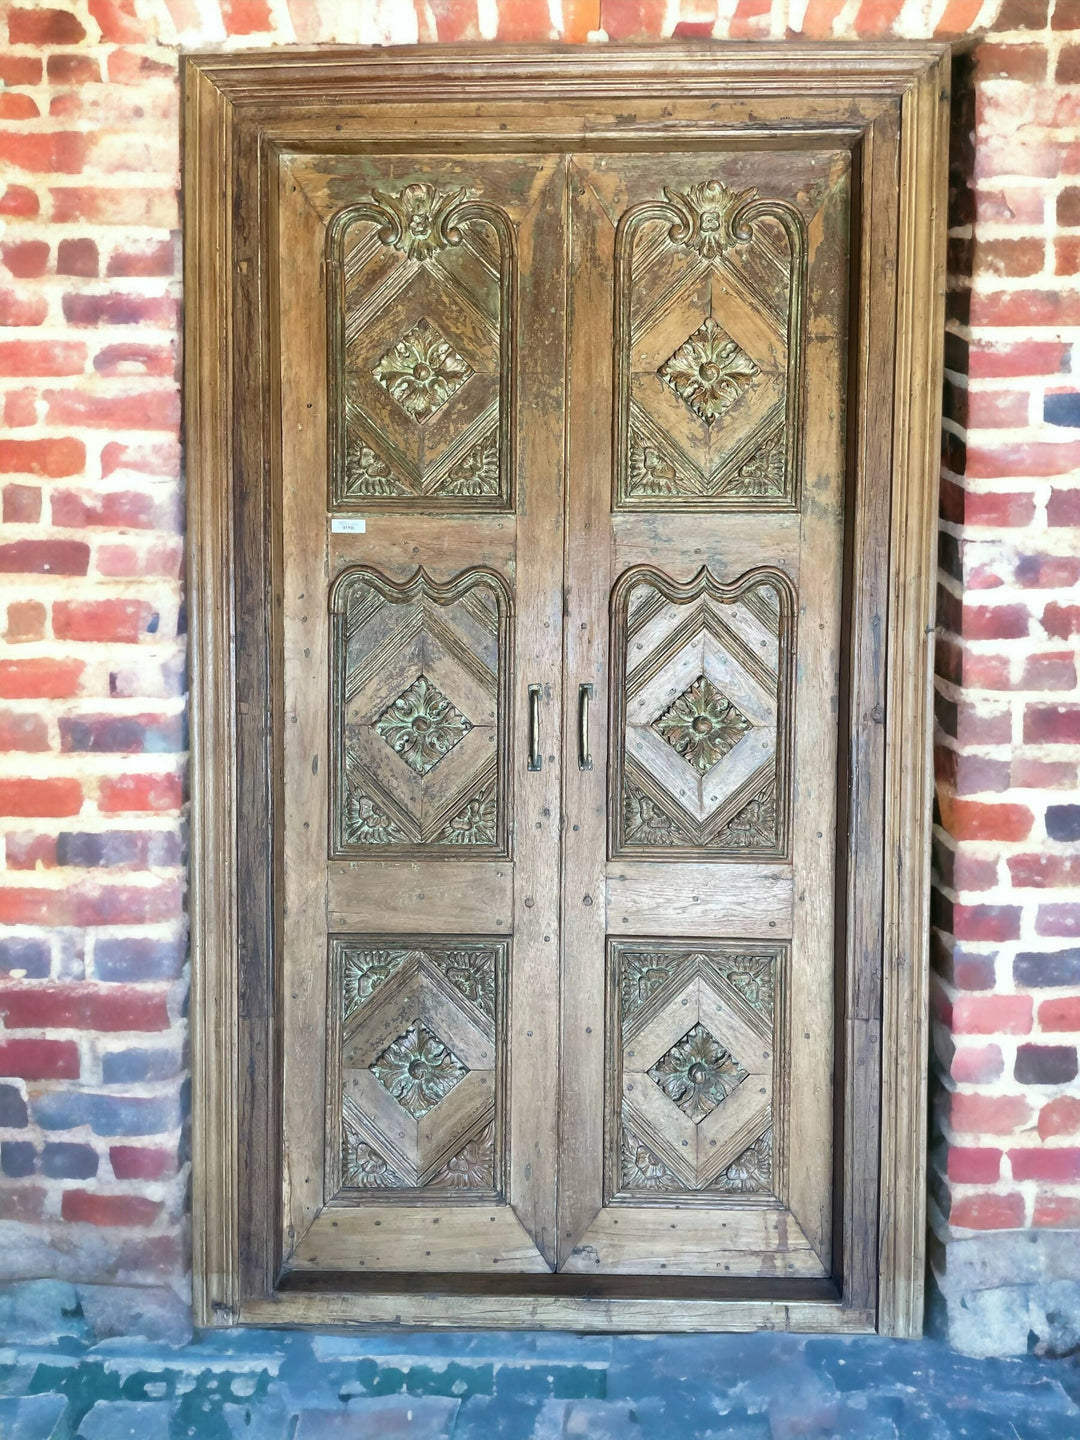 100 hundred year old teak door - Dimensions: 55 wide x 88 high America Reclaimed